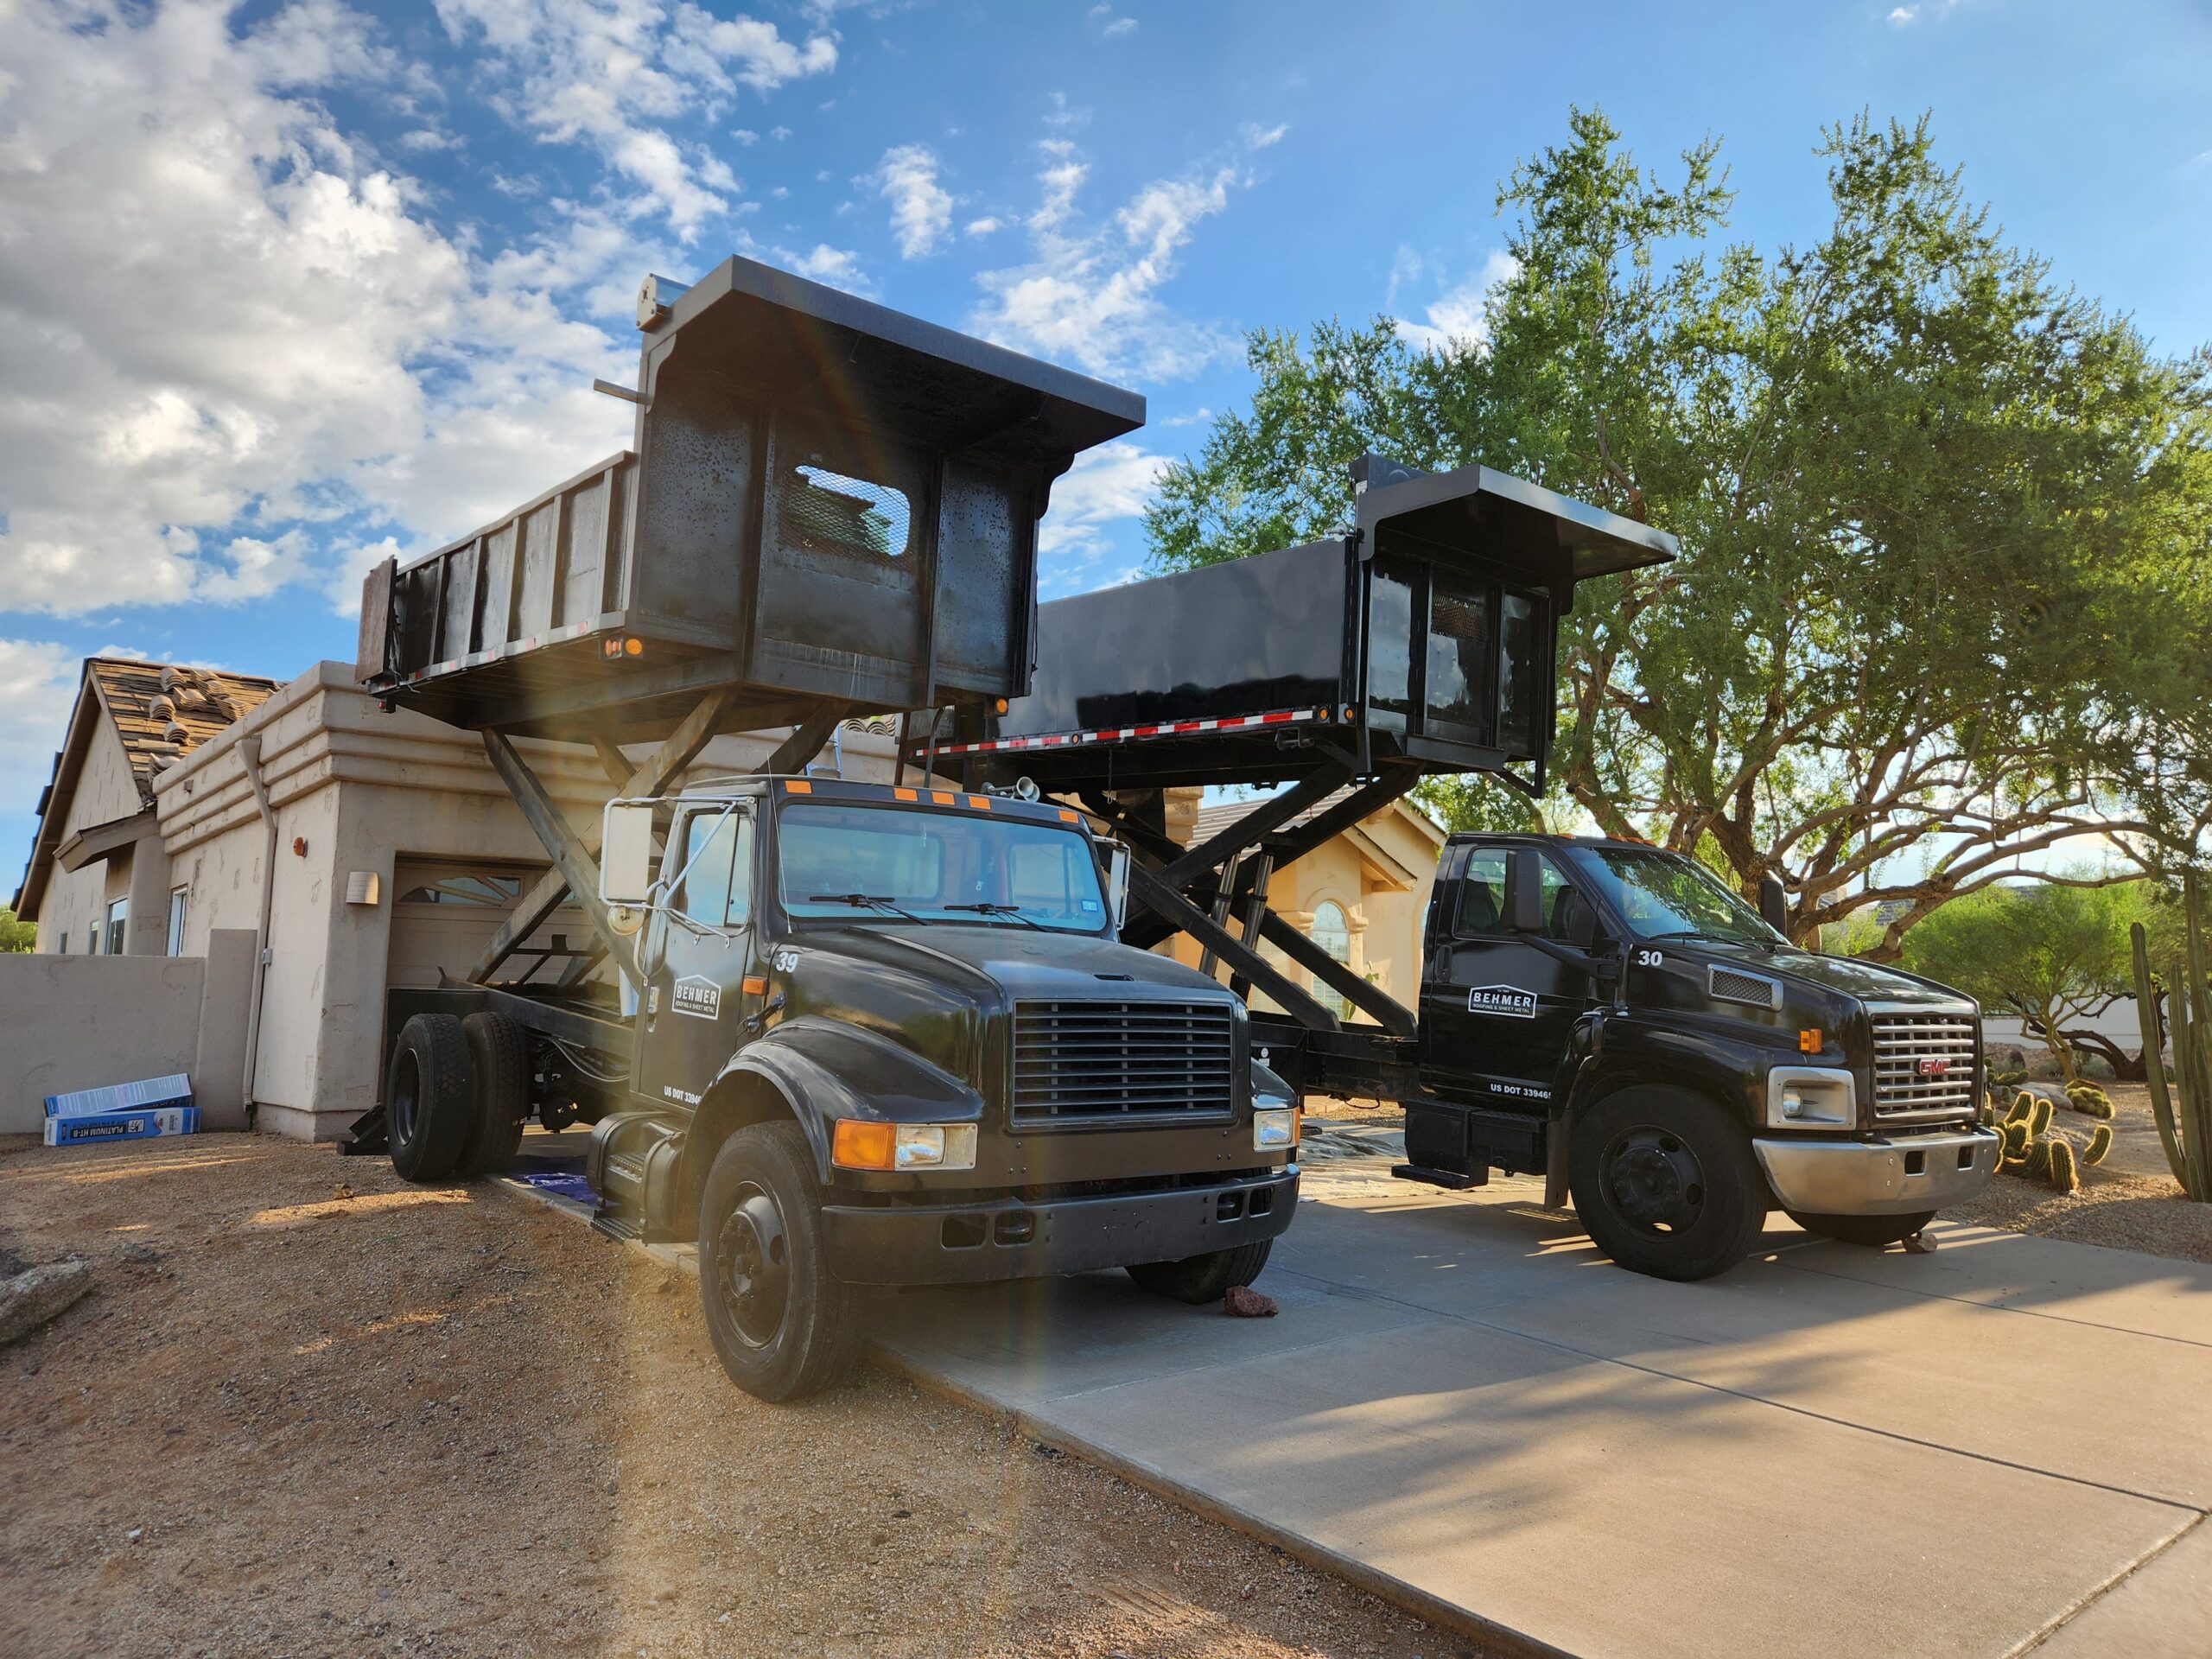 Twin black Behmer trucks parked at a Biltmore area job site, indicating quality service.